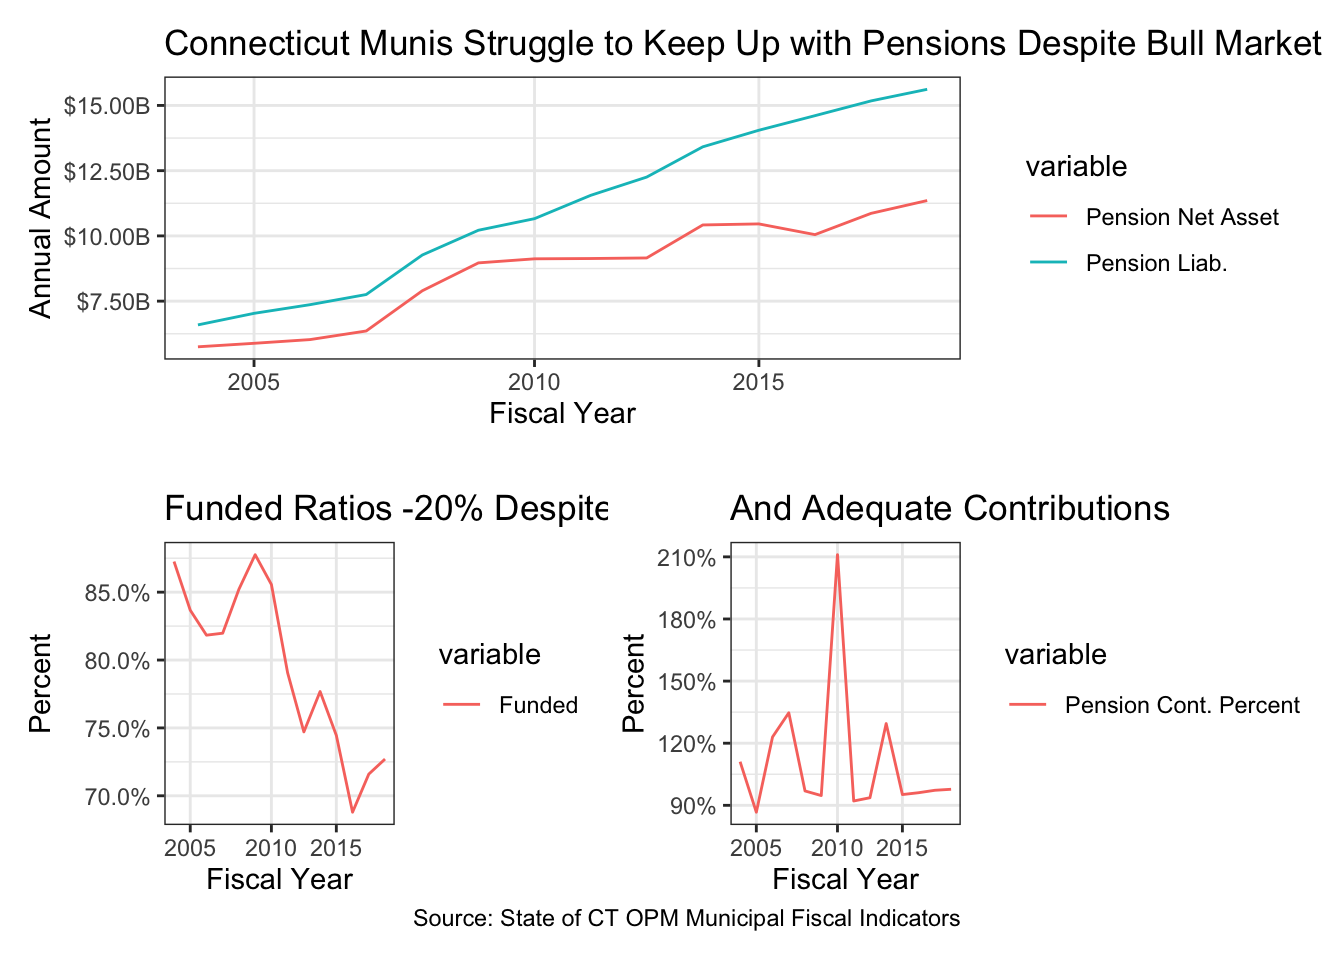 Pension Liability and Funding Over Time